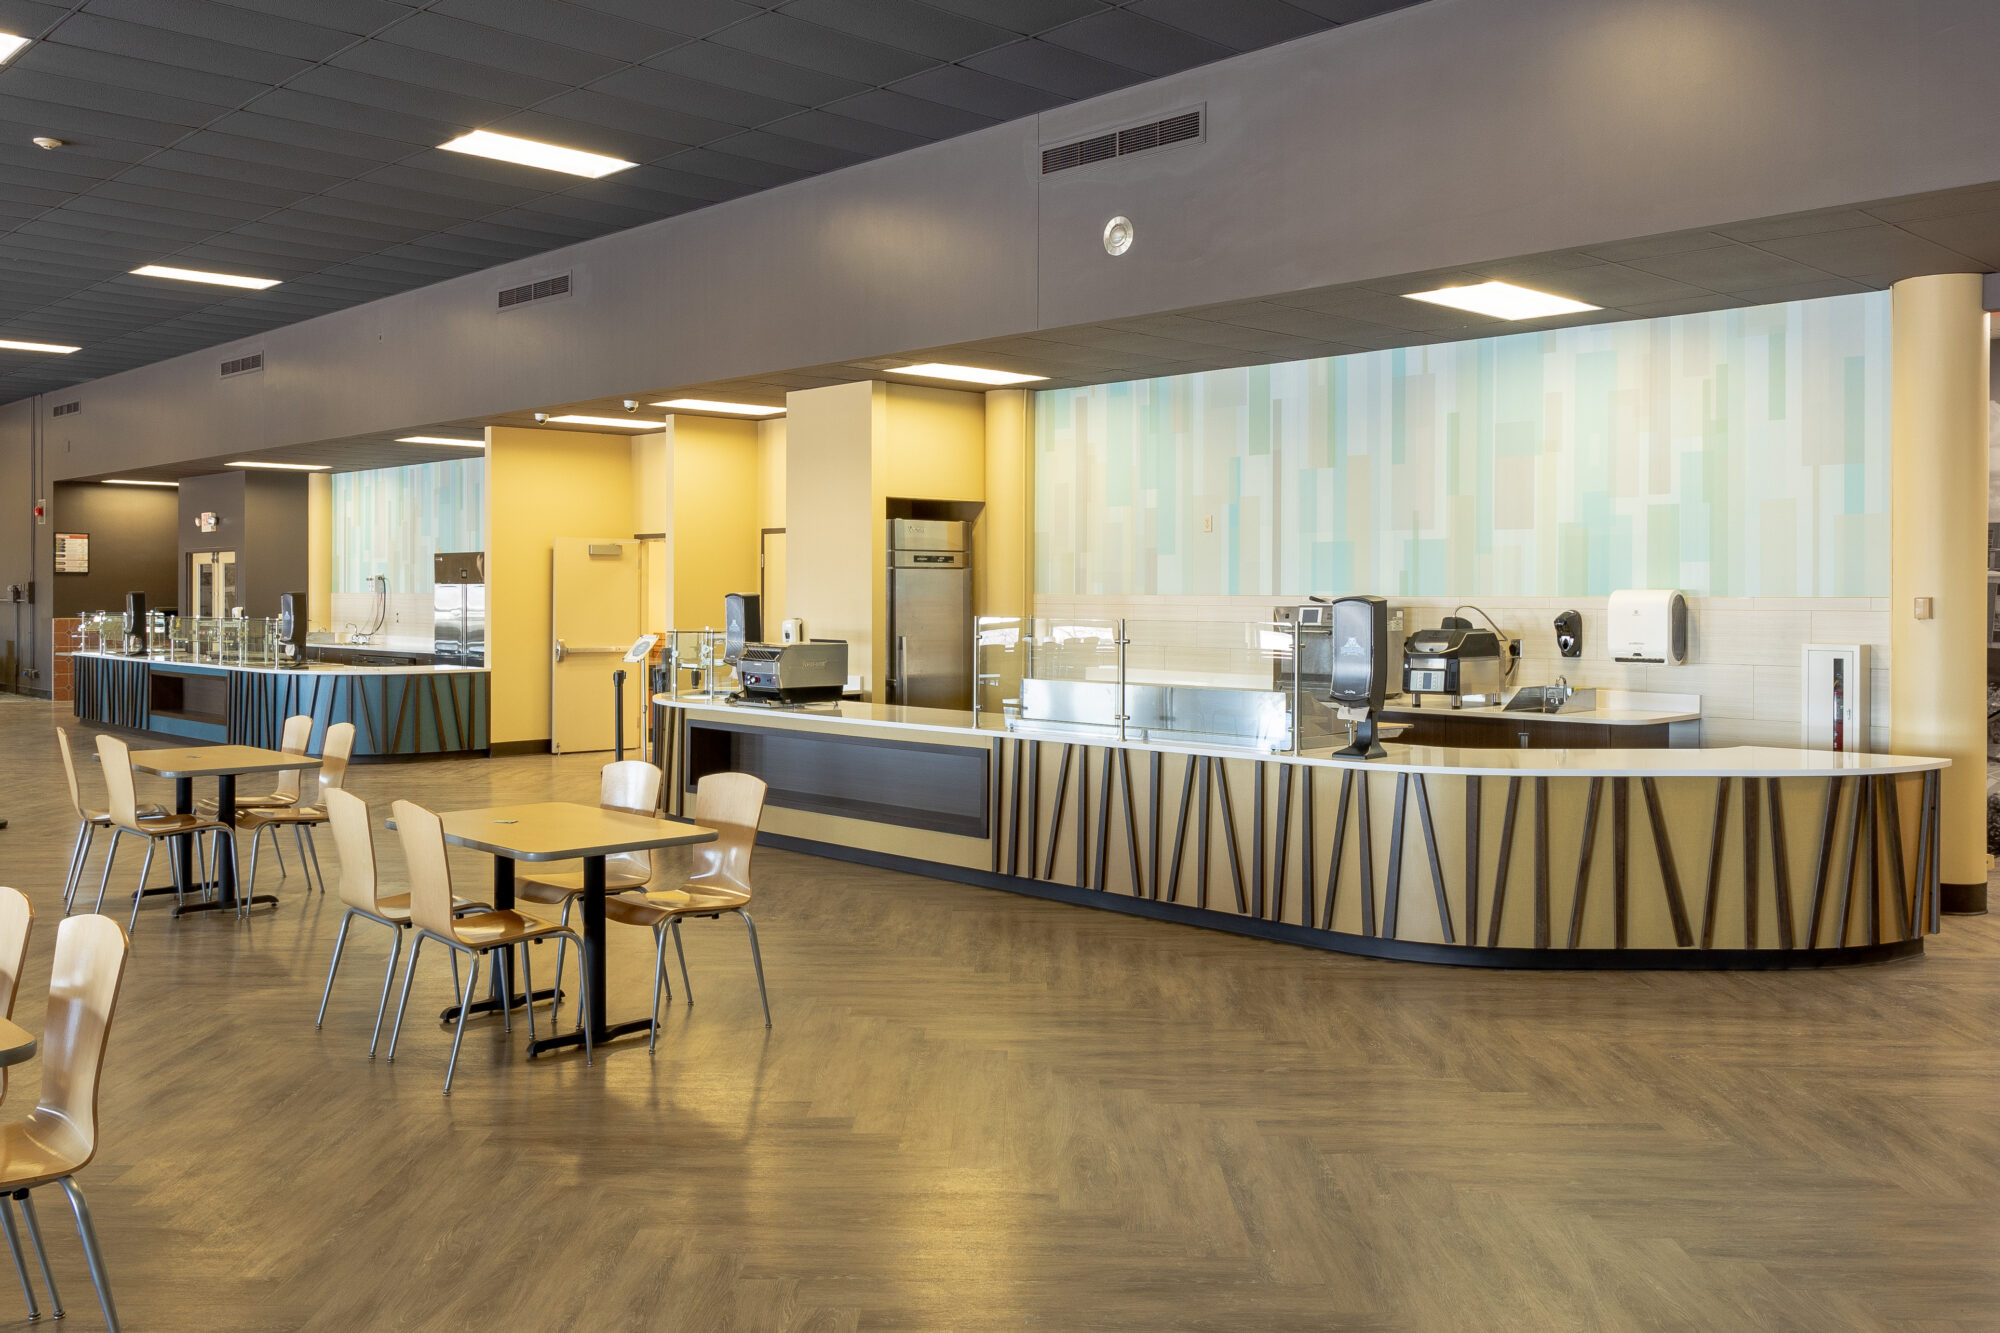 Revamped Daemen College Cafe showcasing stylish service counters with wooden accents, food preparation tables, and self-serve stations.